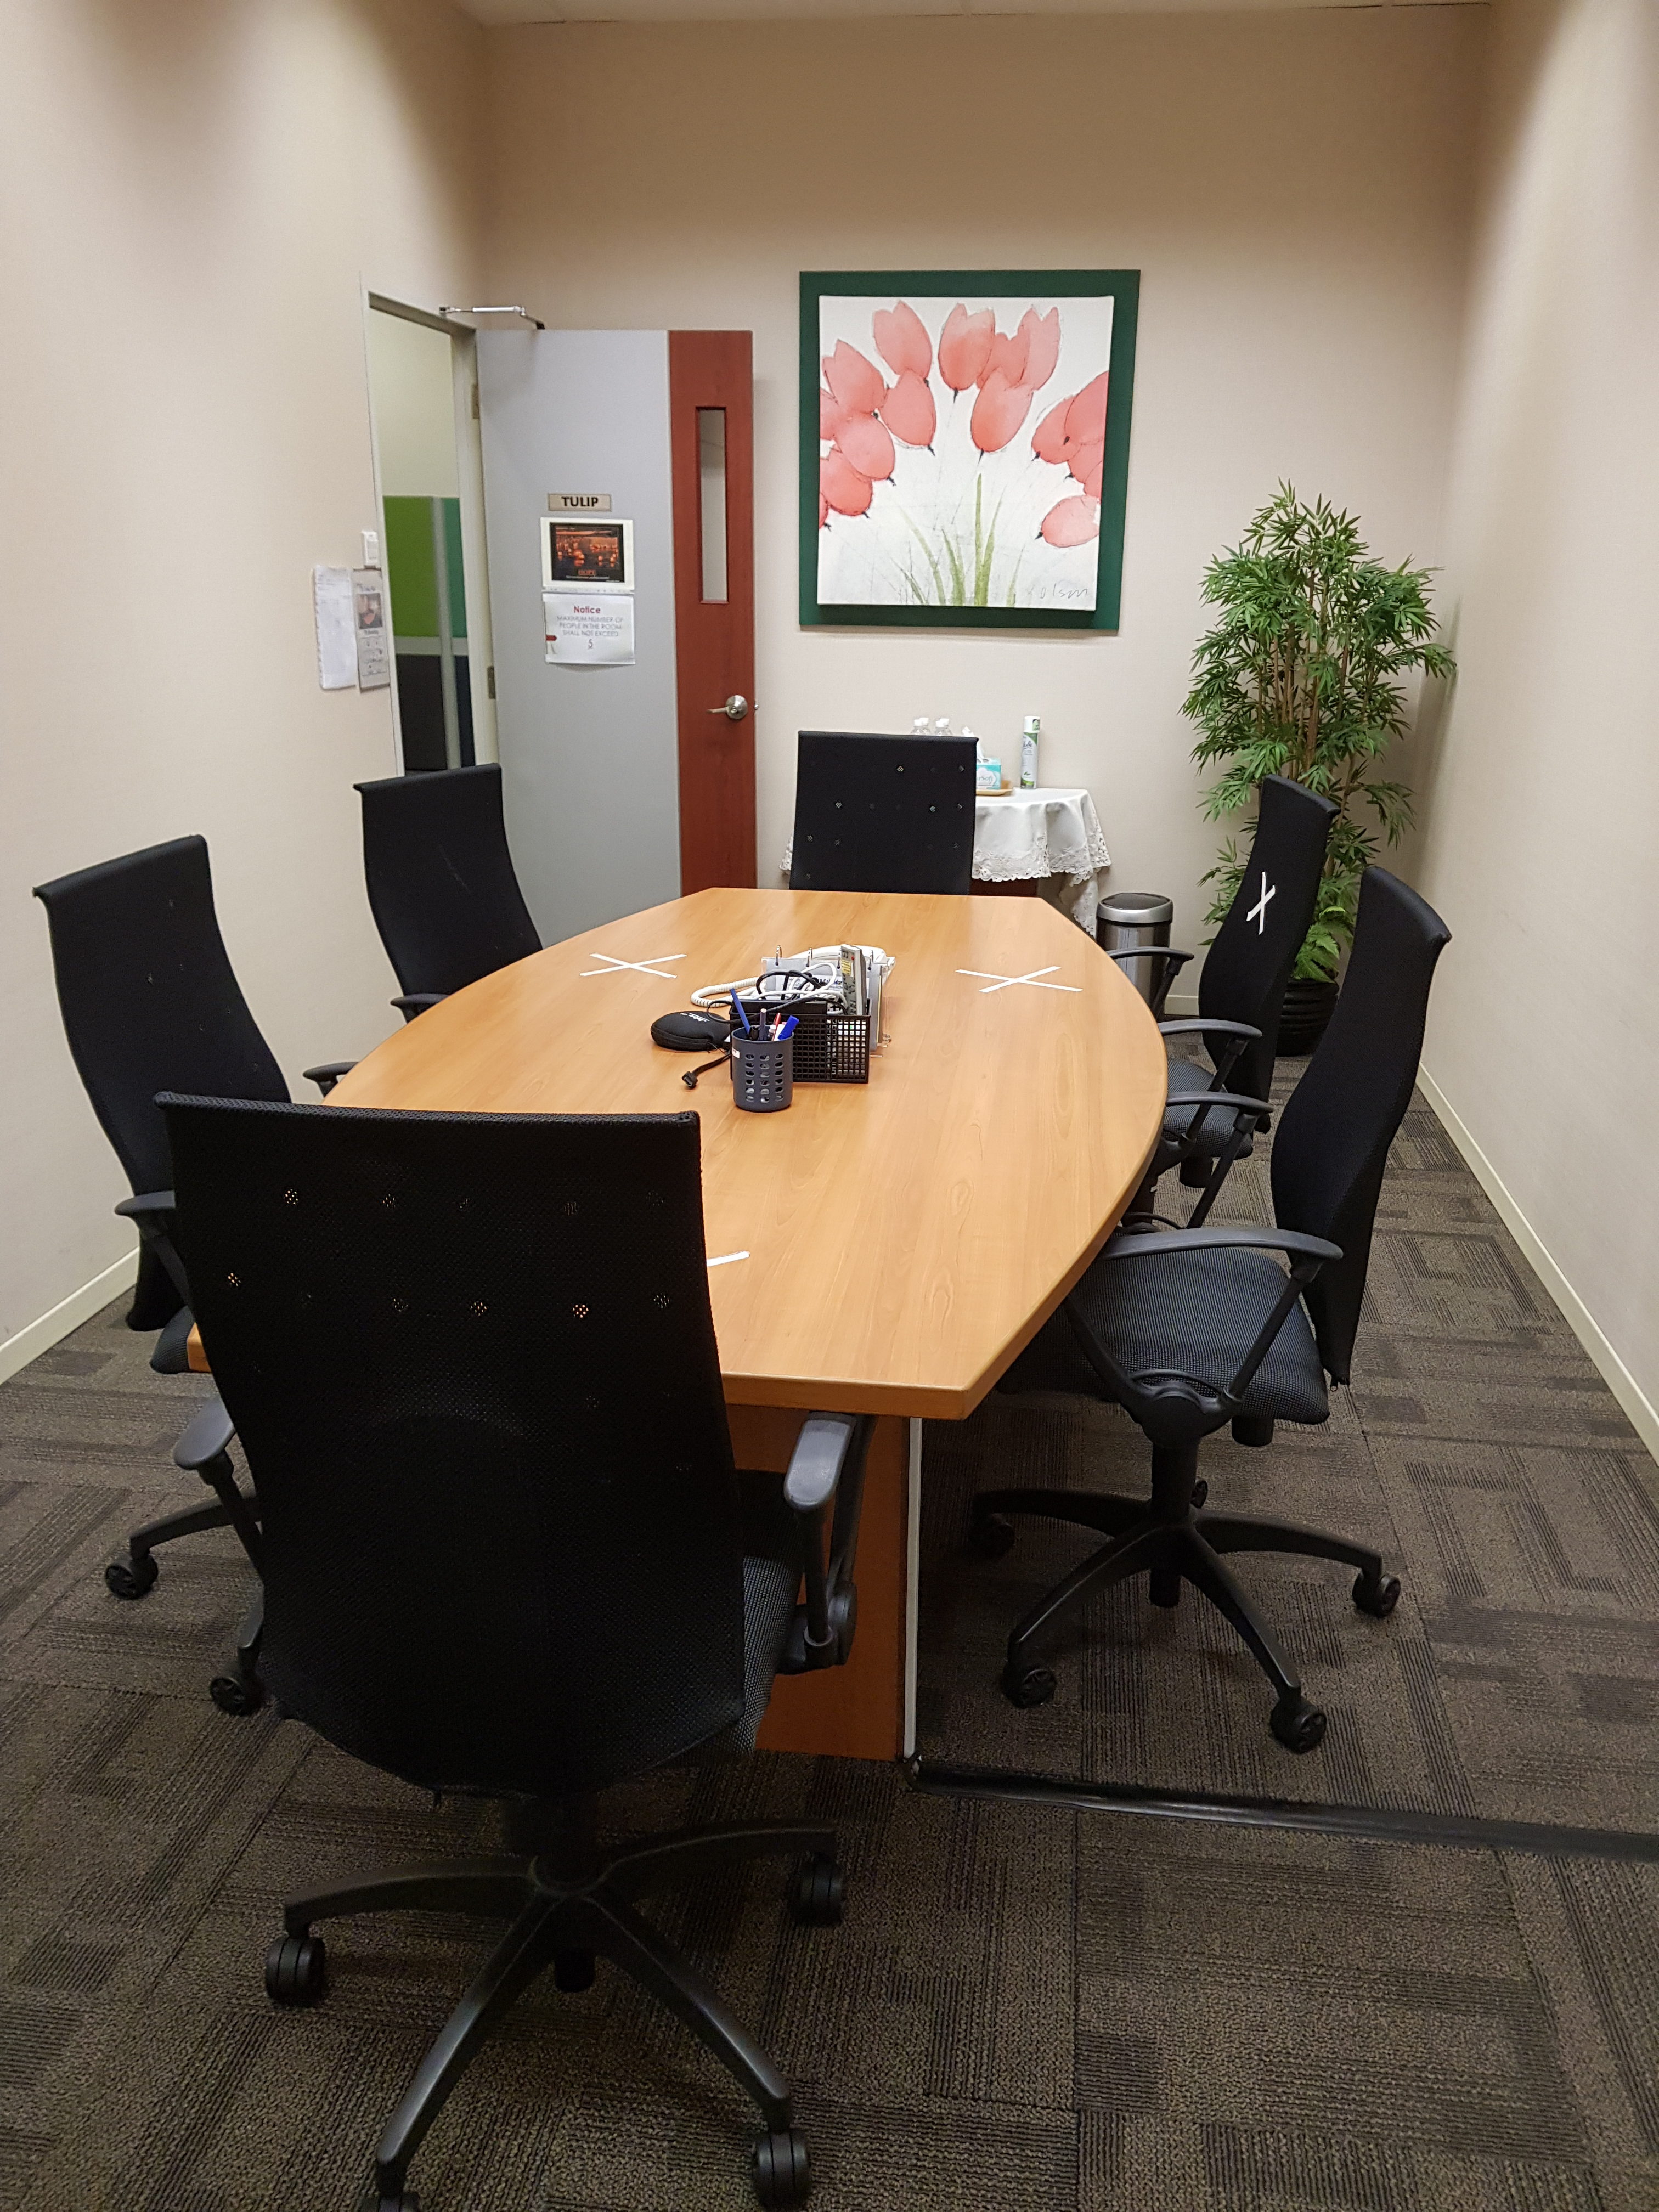 A conference room at Intricon, a global leader in micromedical technology and joint development manufacturer